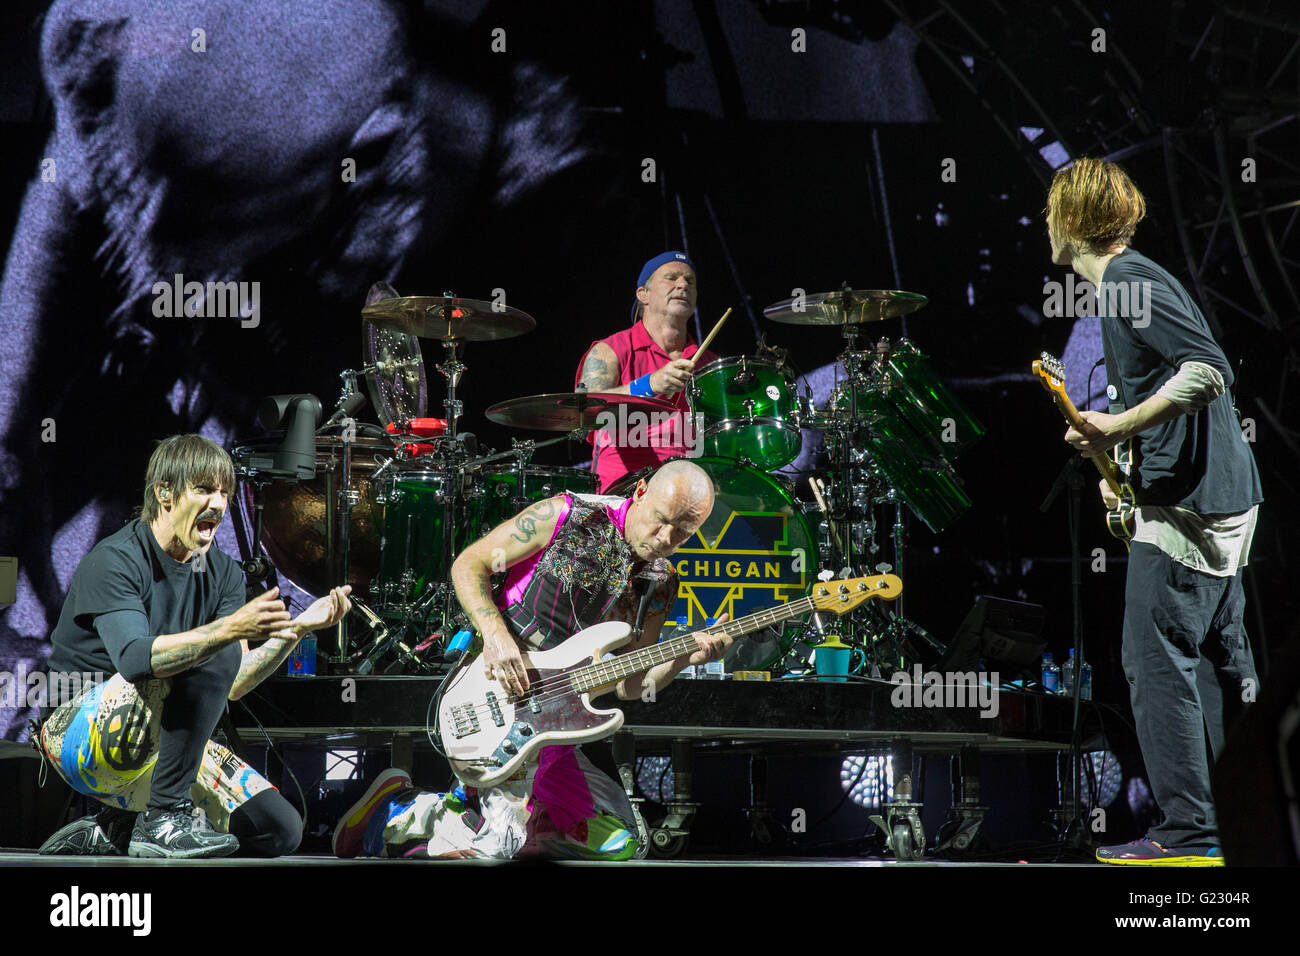 Columbus, Ohio, USA. 22nd May, 2016. ANTHONY KIEDIS, FLEA, CHAD SMITH and JOSH KLINGHOFFER (L-R) of Red Hot Chili Peppers perform live during Rock on the Range music festival at Columbus Crew Stadium in Columbus, Ohio © Daniel DeSlover/ZUMA Wire/Alamy Live News Stock Photo